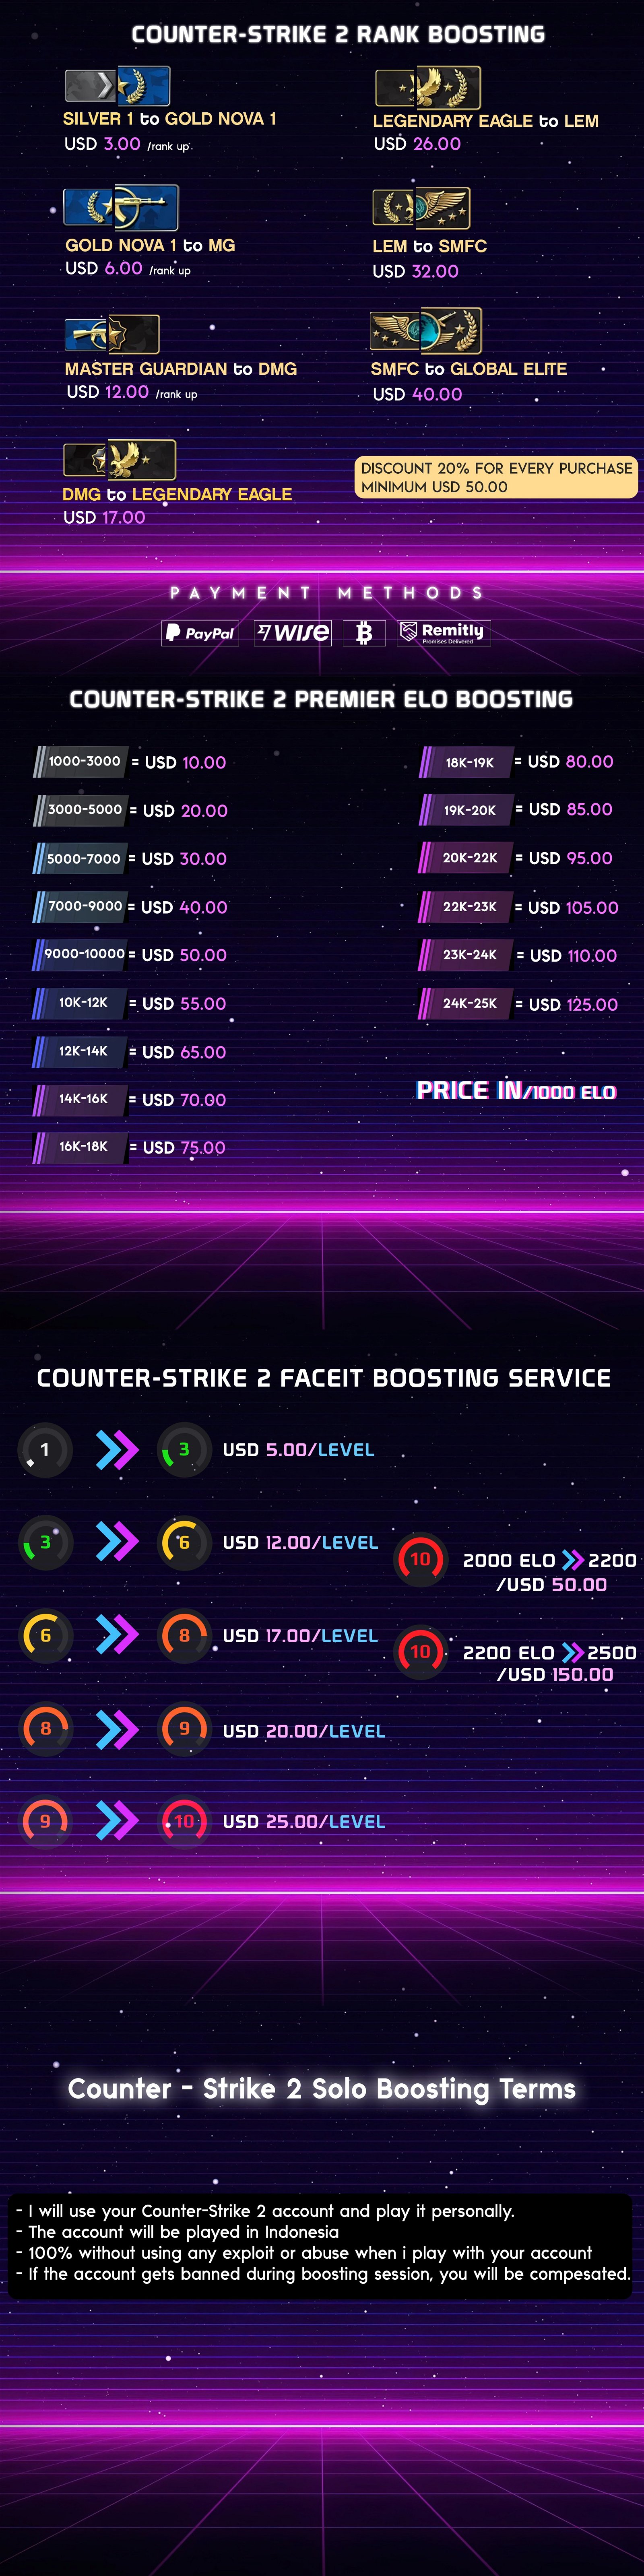 Faceit Boosting Service, Boost any Level or Elo you Desired